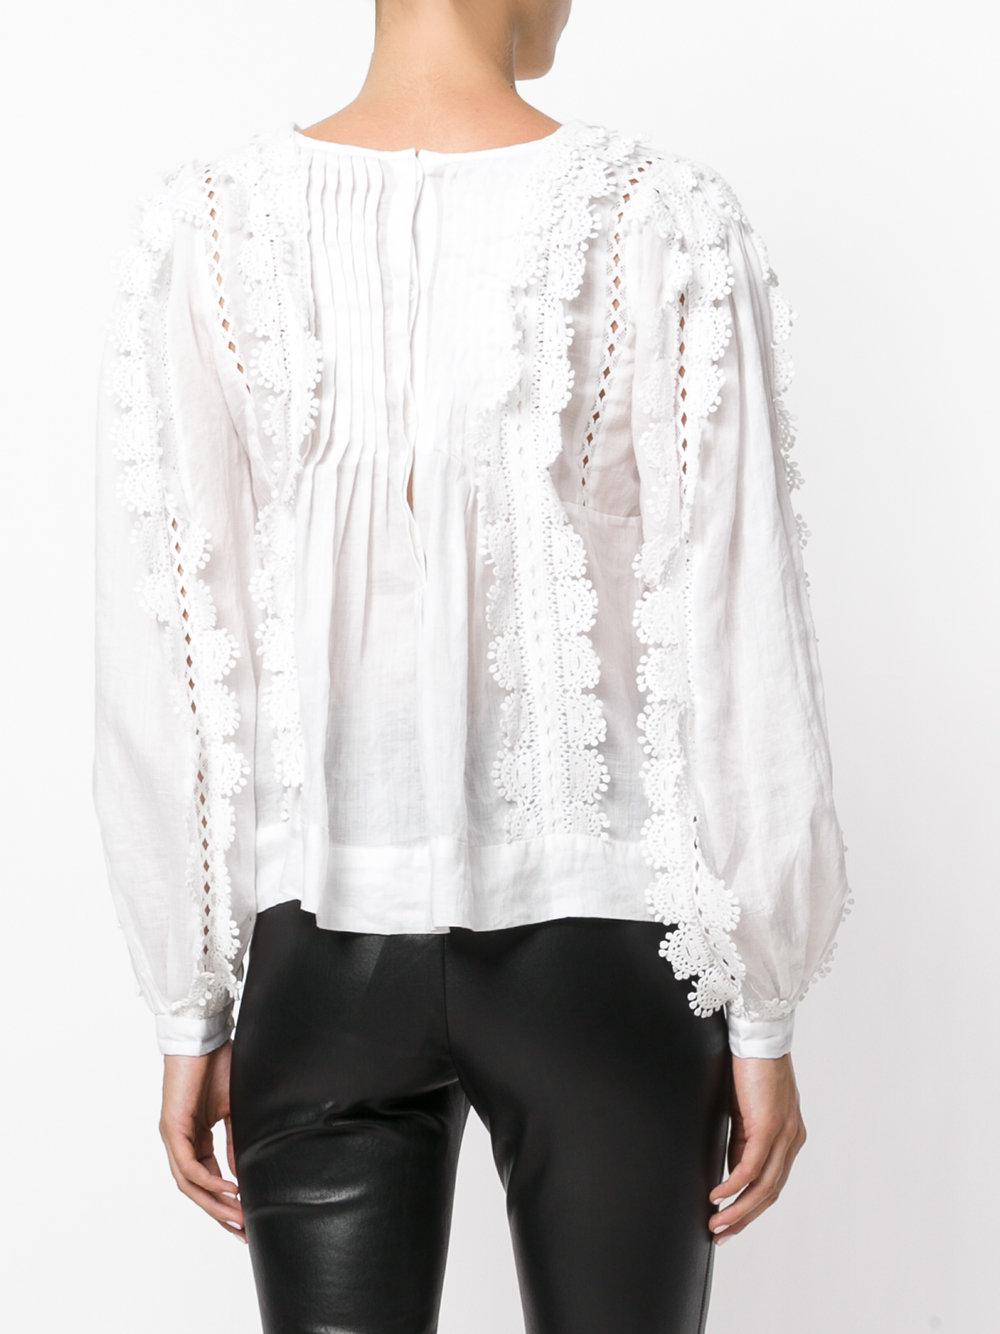 Isabel Marant Cotton Nell Blouse in White - Lyst